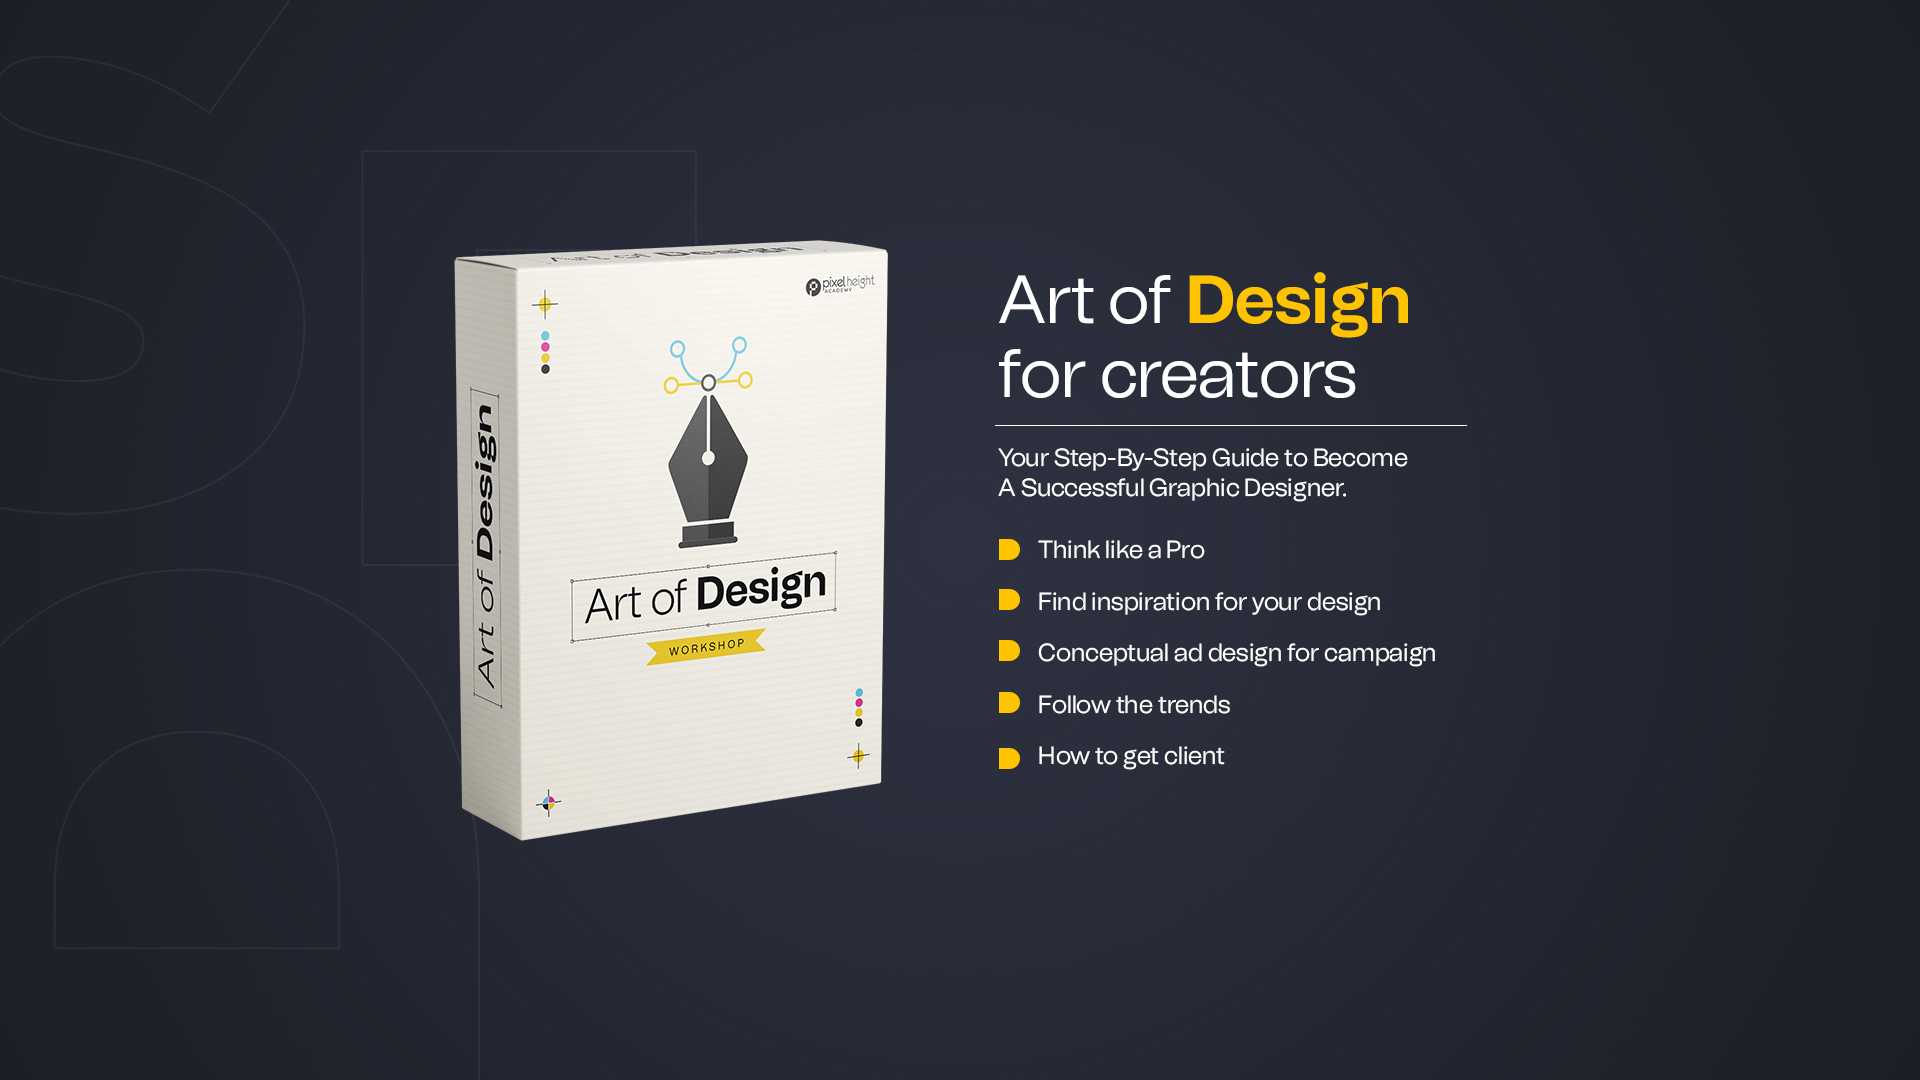 Art Of Design For Creators - Full Step Guide To Become A Creative Designer